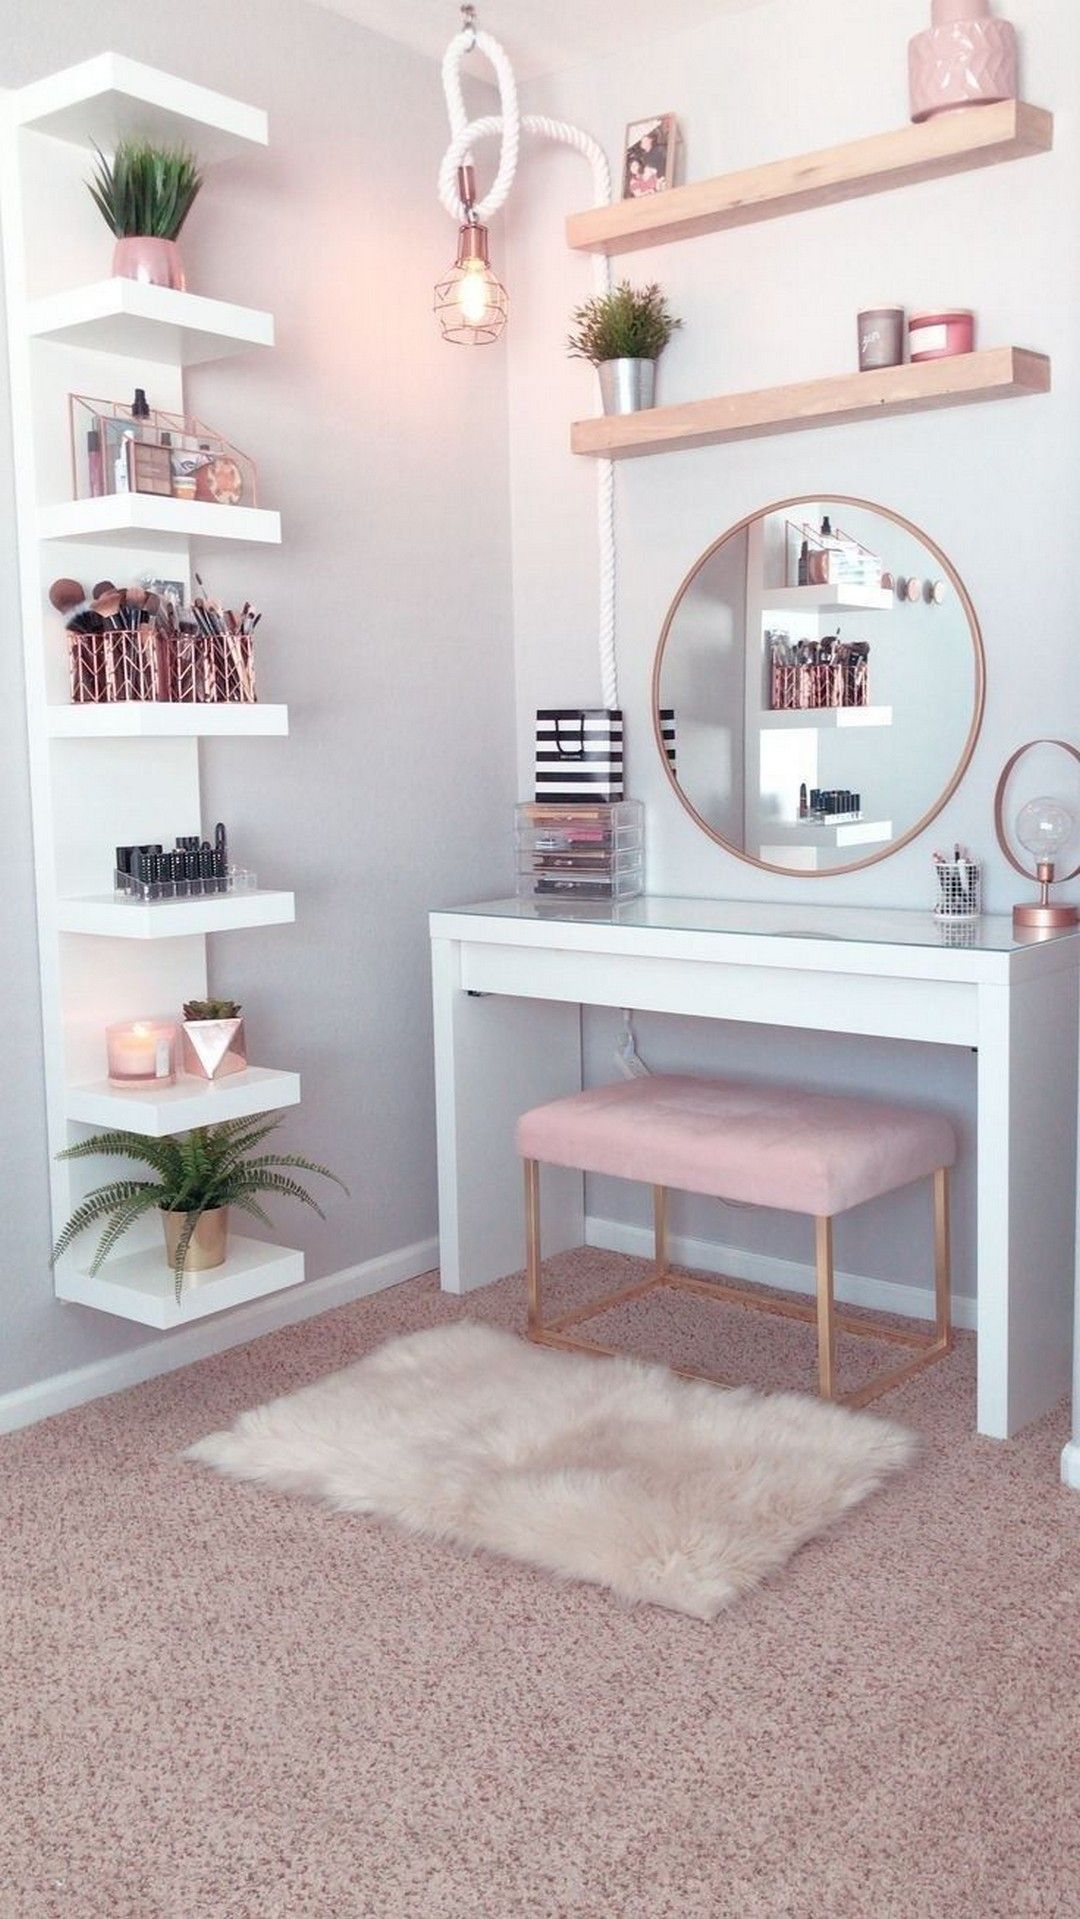 26 Makeup Room Ideas To Brighten Your Morning Routine